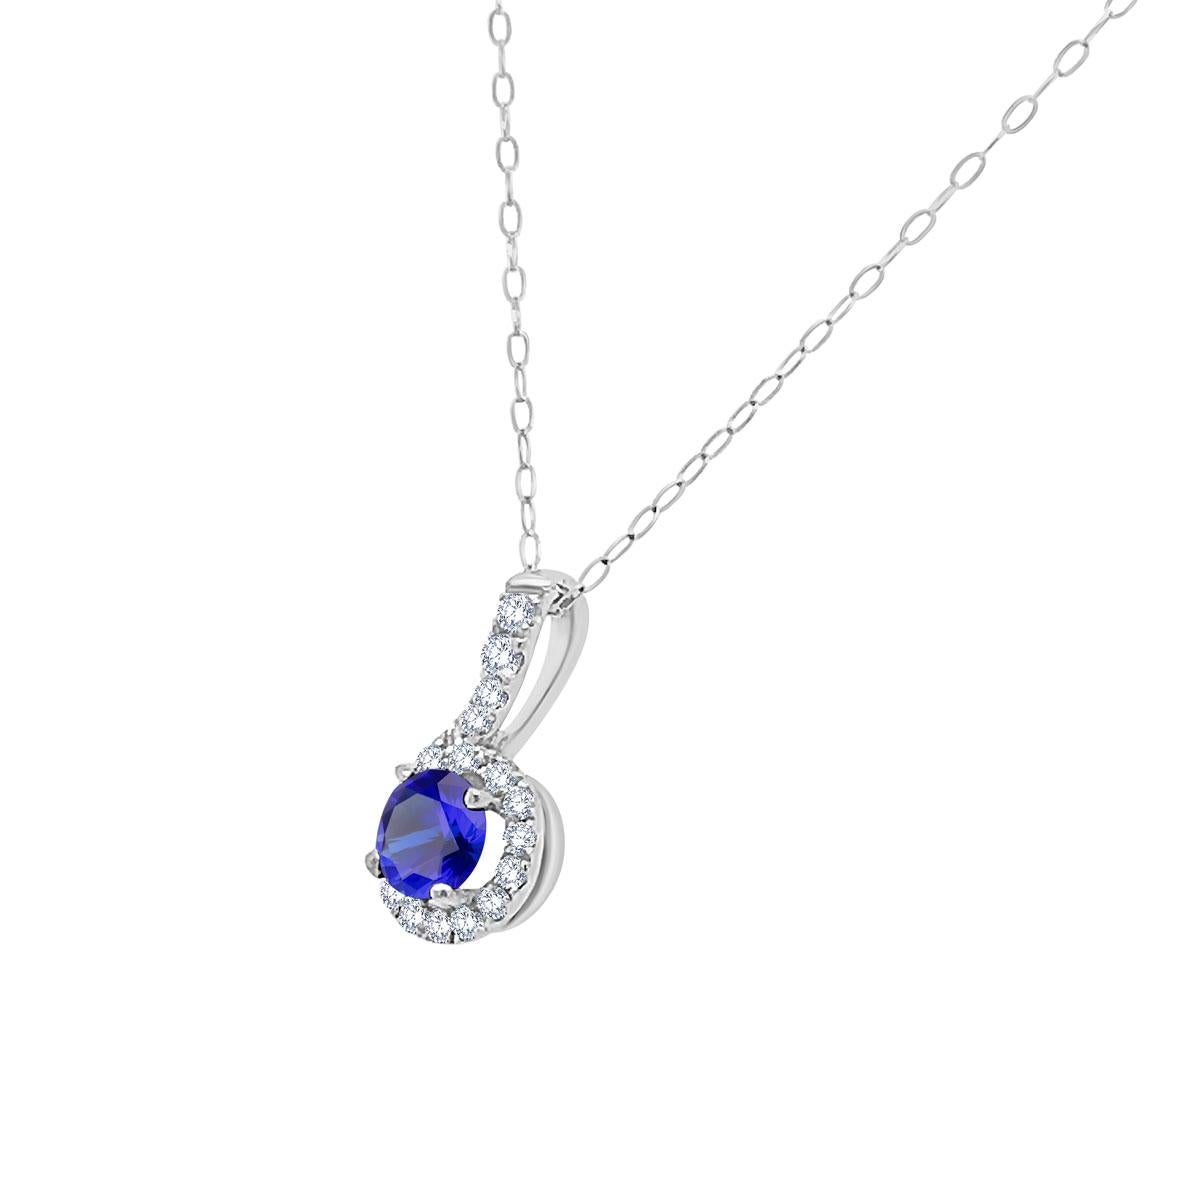 This 18k White gold pendant features a preminum quality 0.54 carat Round Shape Blue Sapphire, framed in a halo of 0.25 total carat weight of brilliant diamonds. This pendant is ideal for any occasions. Experience the Difference!

Product details: